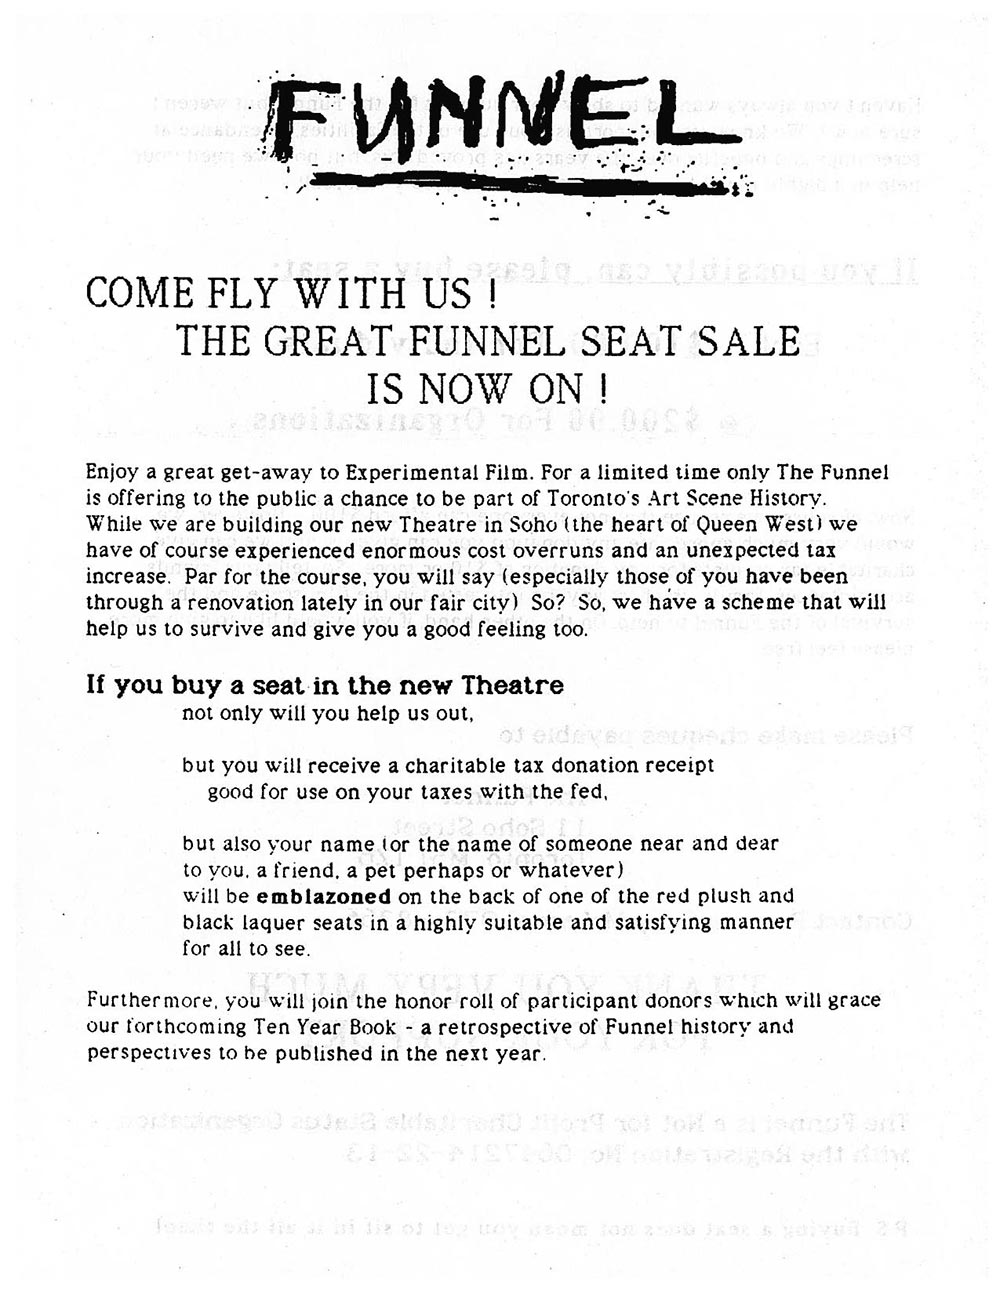 Small Seat Sale 1989a